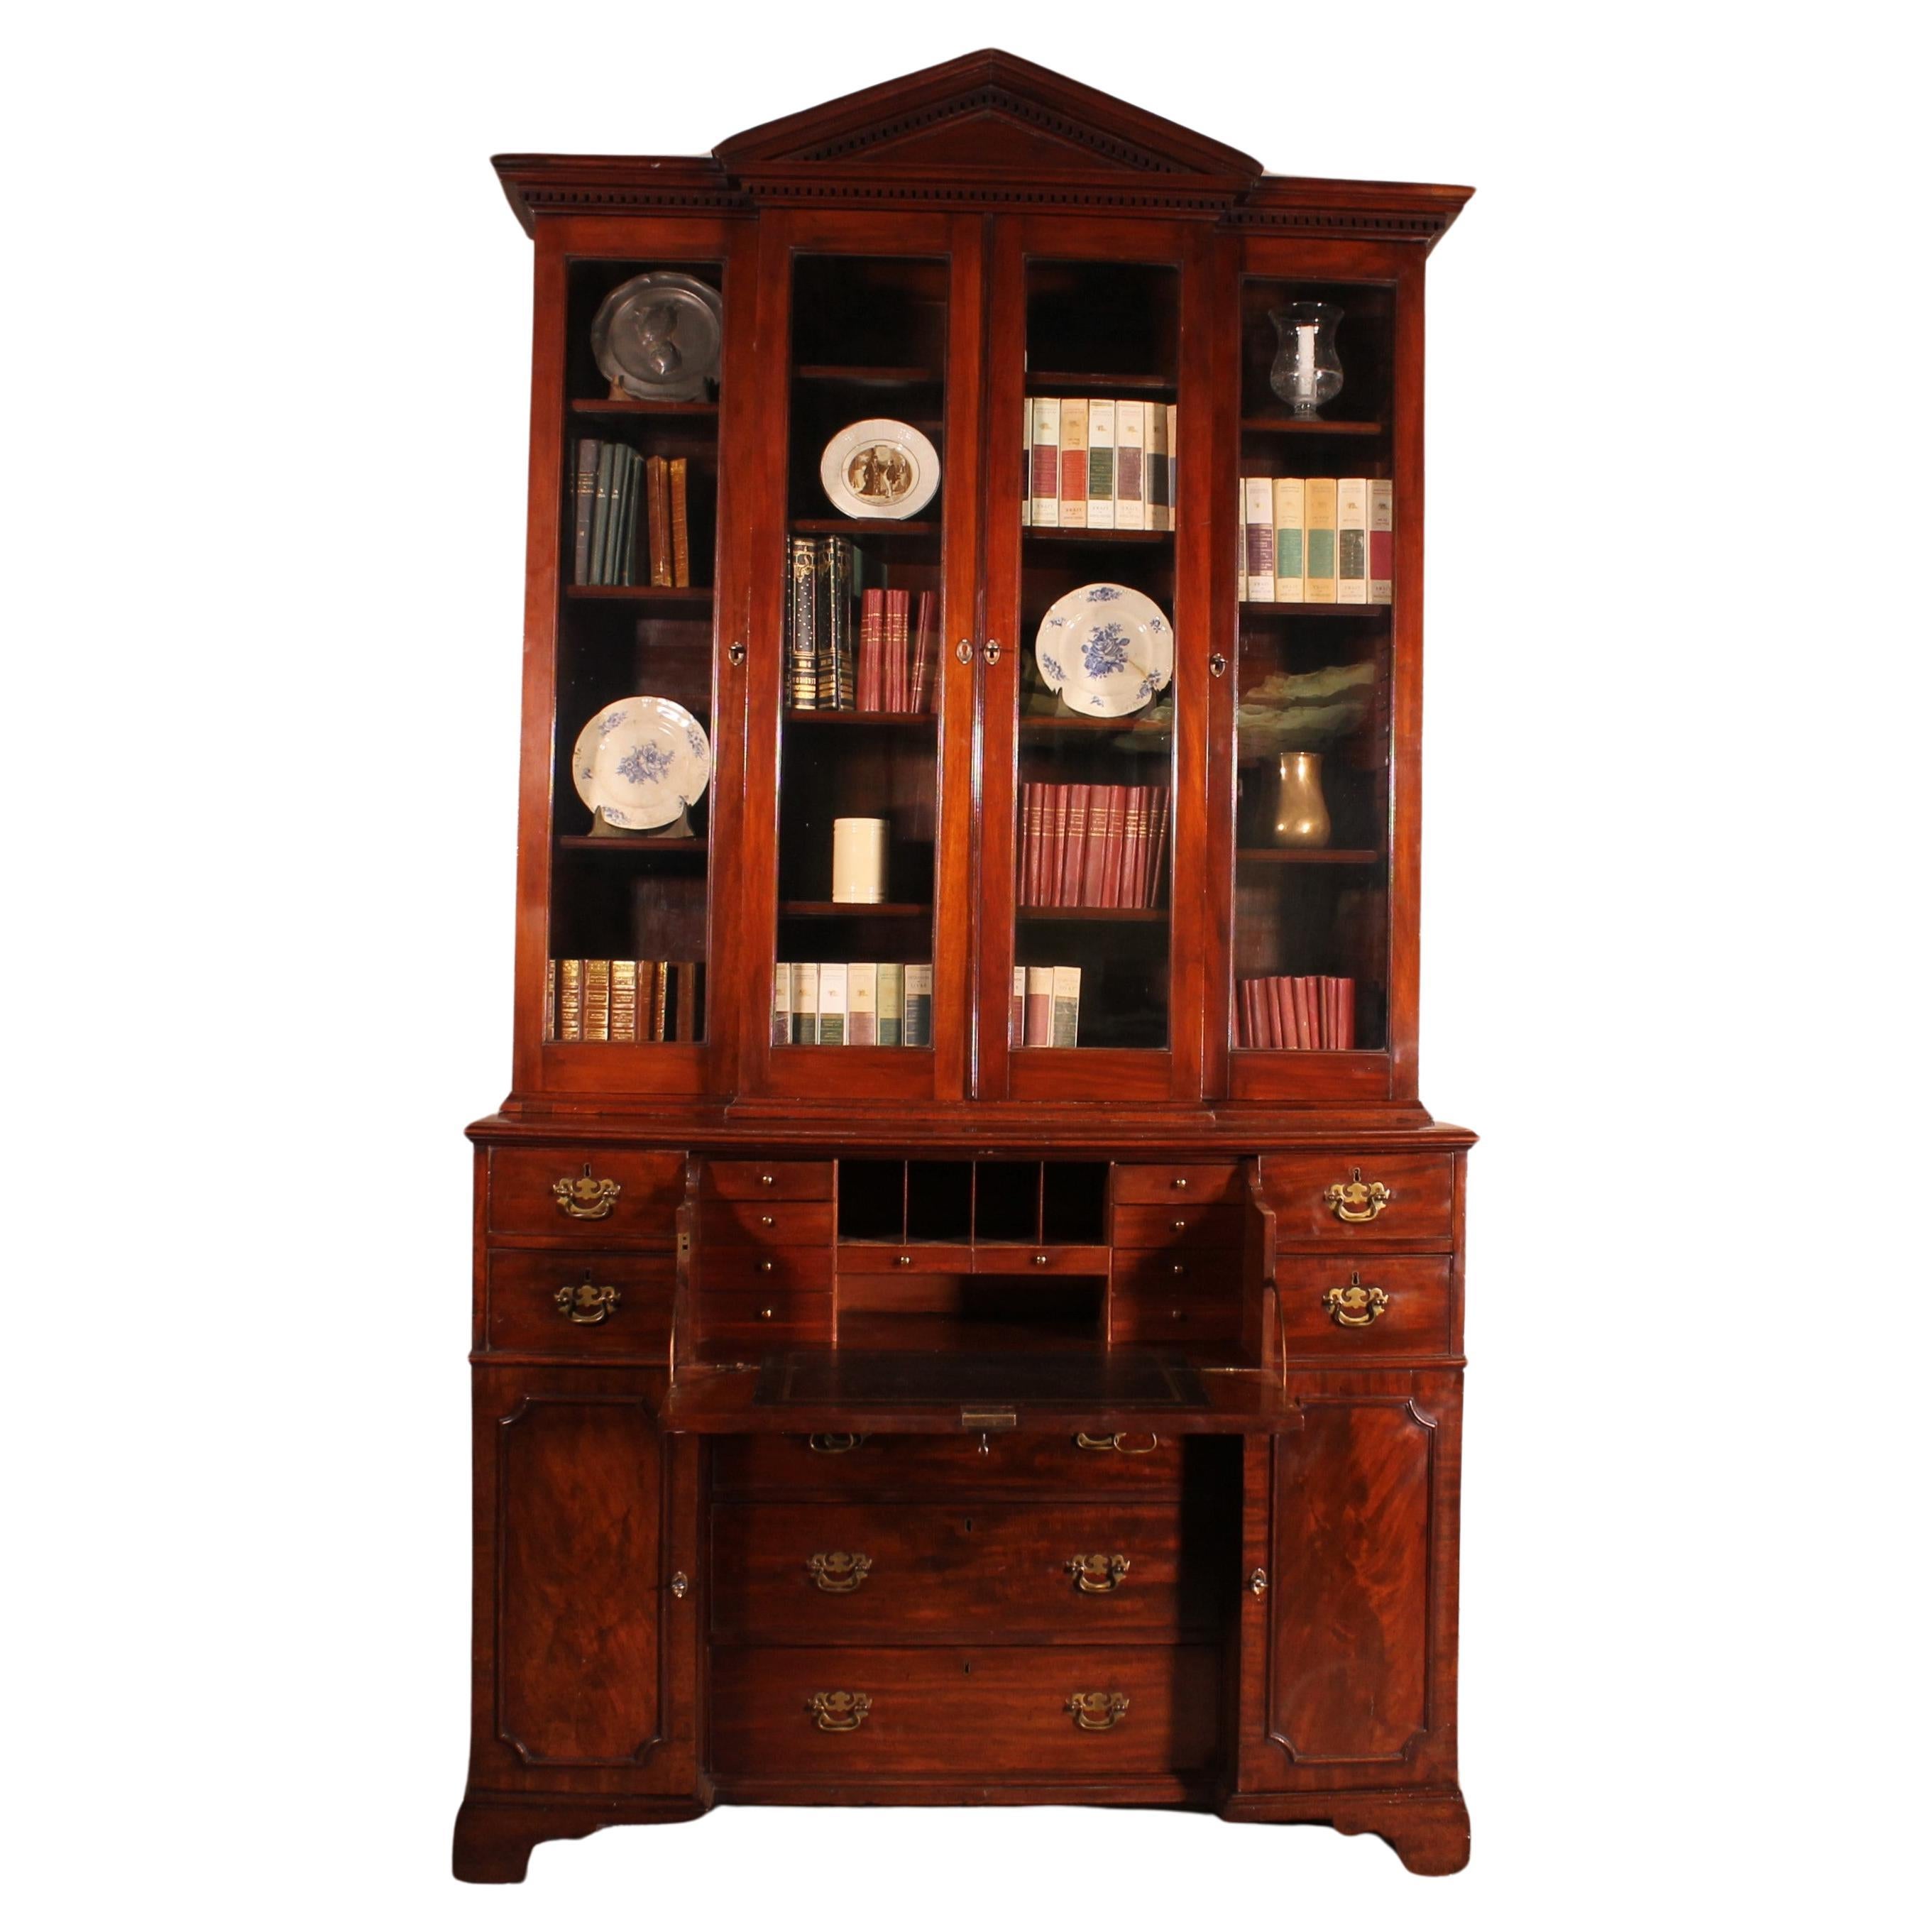 Mahogany Showcase Cabinet Or Library From The 18th Century For Sale